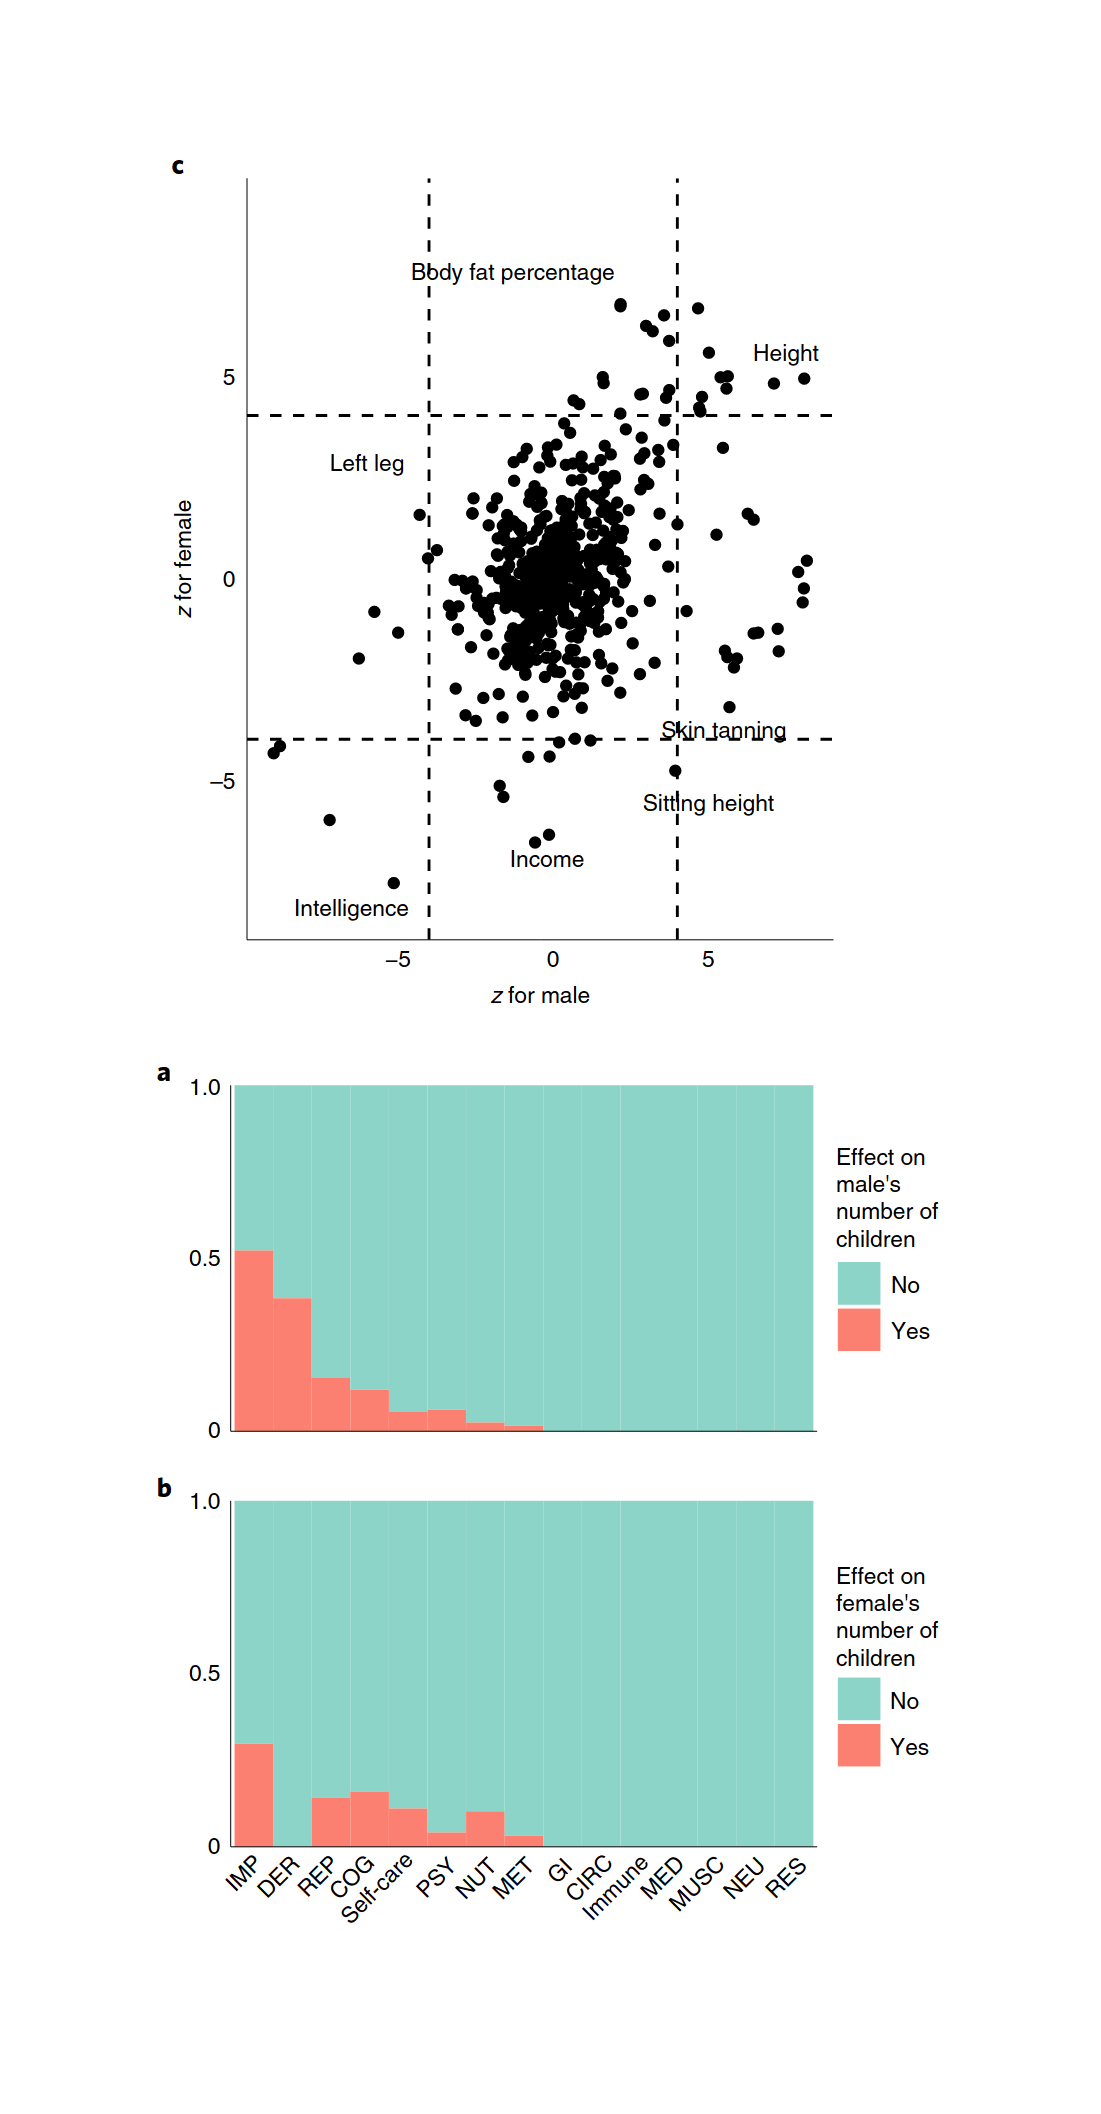 Figure 2: Selection pressure in the present day and in recent history. A, B: Proportion of traits showing MR causal effects on the number of offspring of males (a) and females (b) for each category. c, Comparison of MR z scores between males (x-axis) and females (y-axis). Dashed lines indicate the statistical-significance threshold (|z| > 4). The text indicates selected traits with results of special interest. DER, dermatology; NUT, nutrition; REP, reproduction; GI, gastrointestinal; PSY, psychiatry; RES, respiratory; MED, medication; COG, social cognition; MUSC, musculoskeletal; MET, metabolism; CIRC, circulation; NEU, neurology.